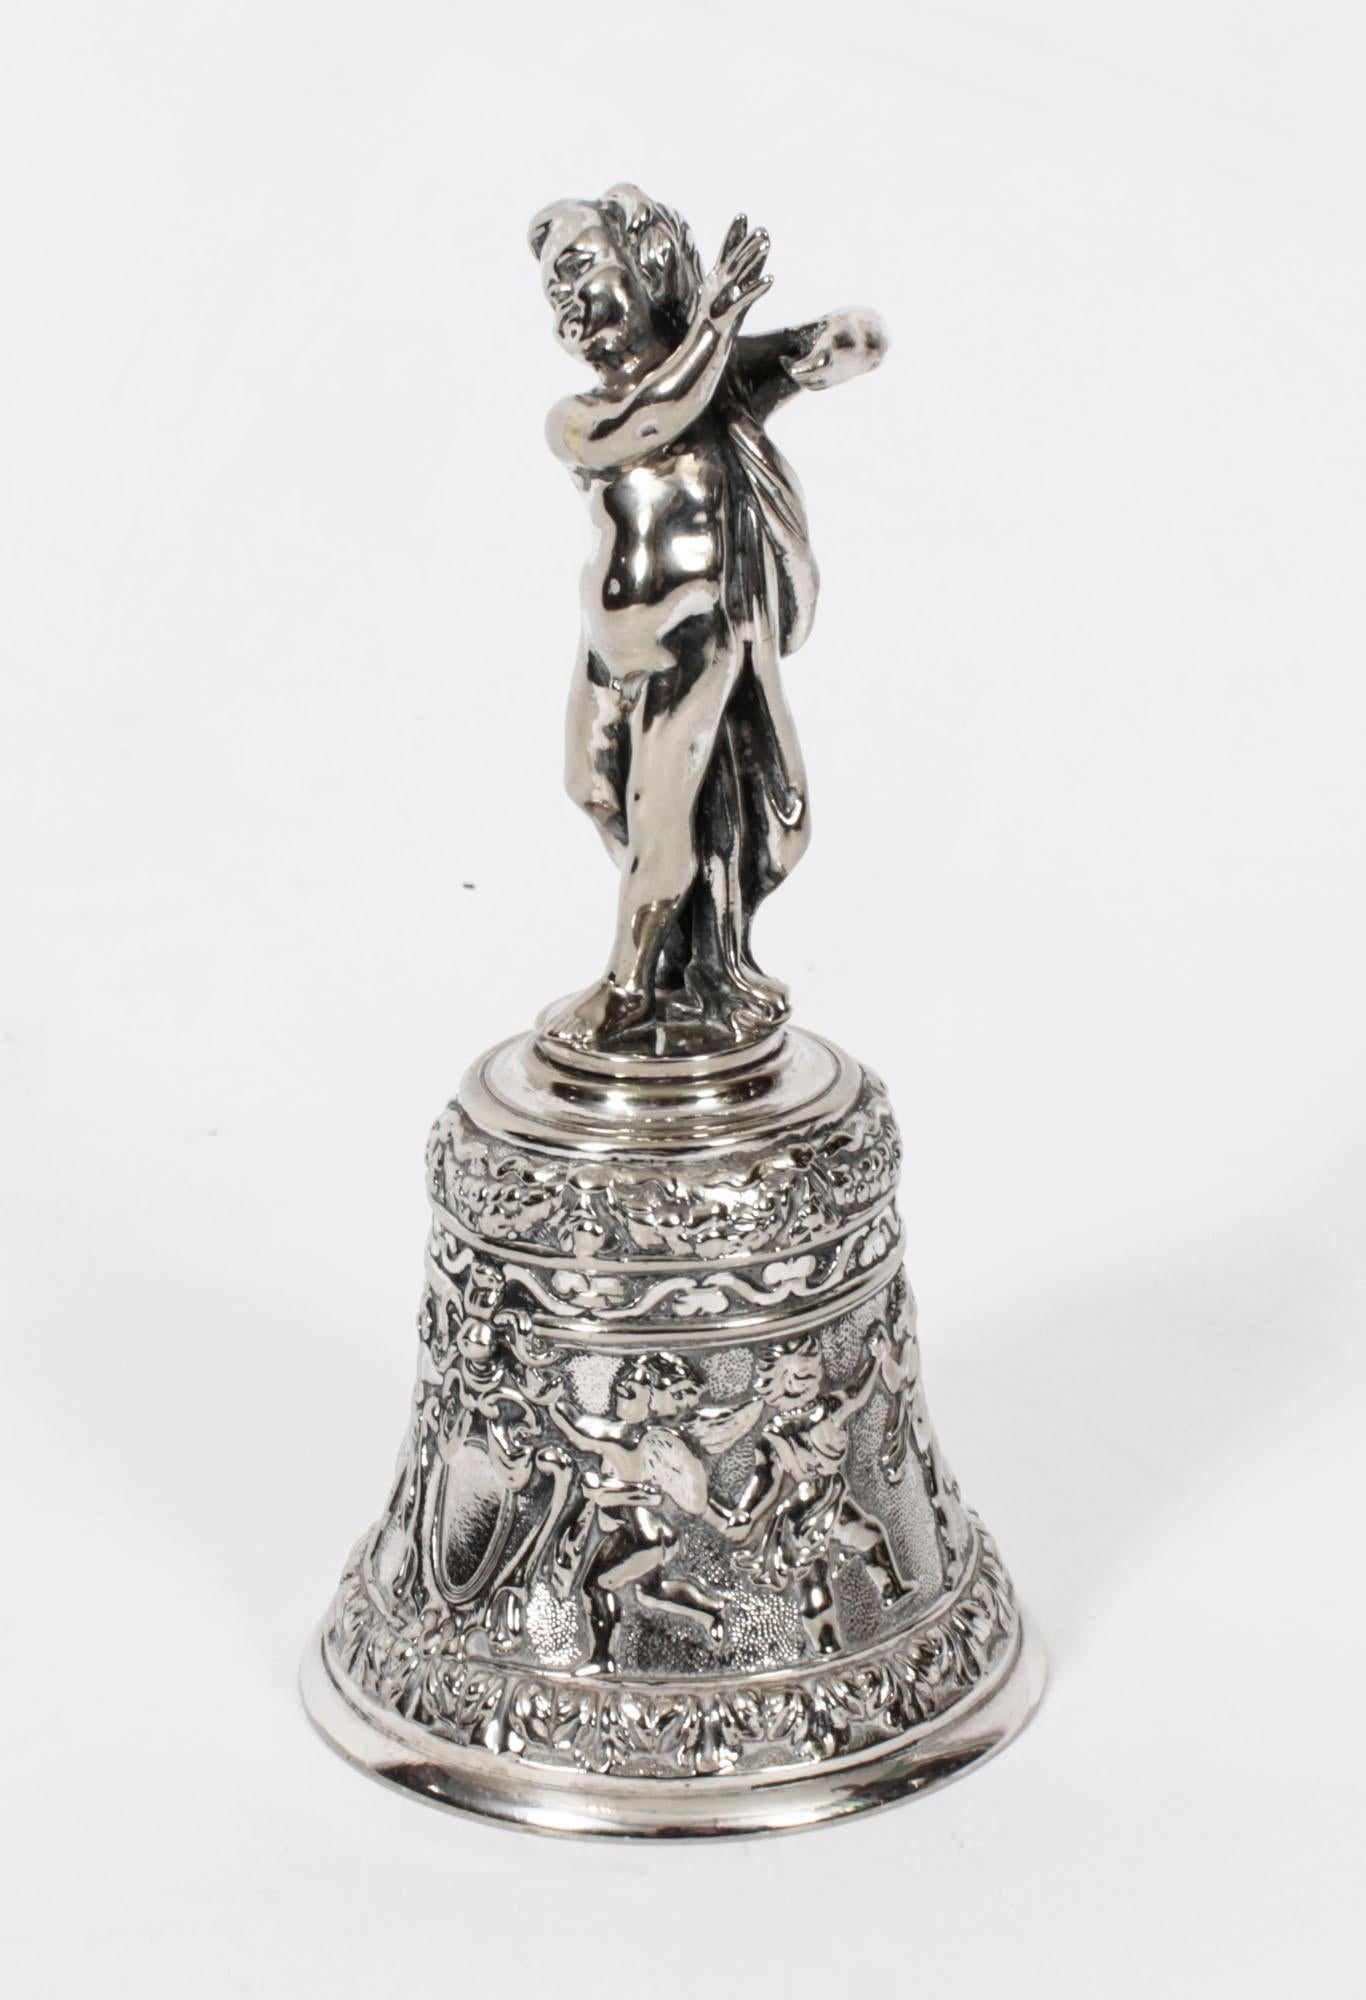 Antique Silver Plated Hand Bell Renaissance Revival 19th Century For Sale 13